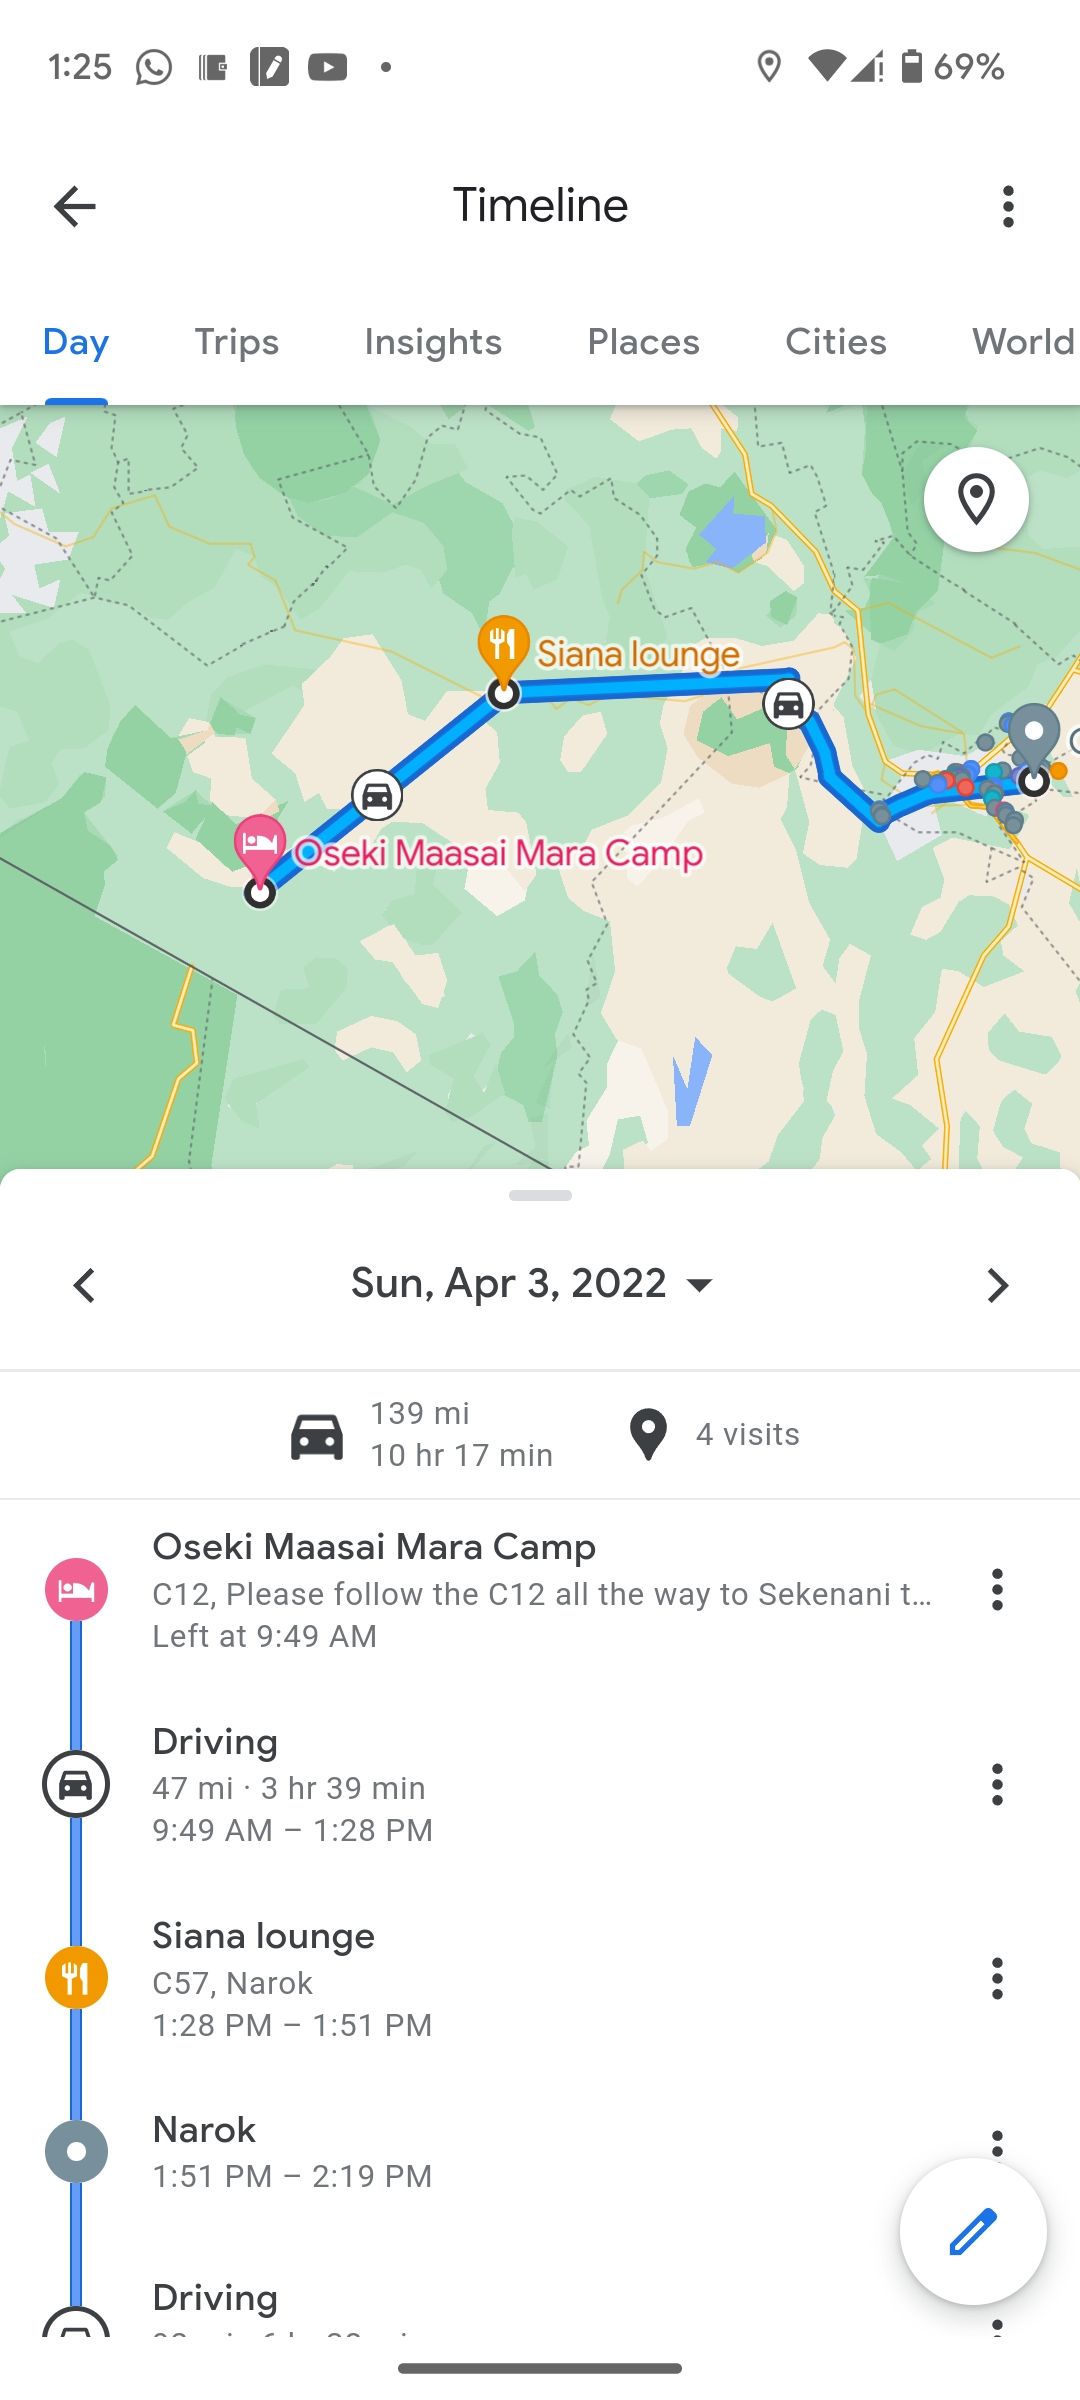 Google Maps' daily timeline view